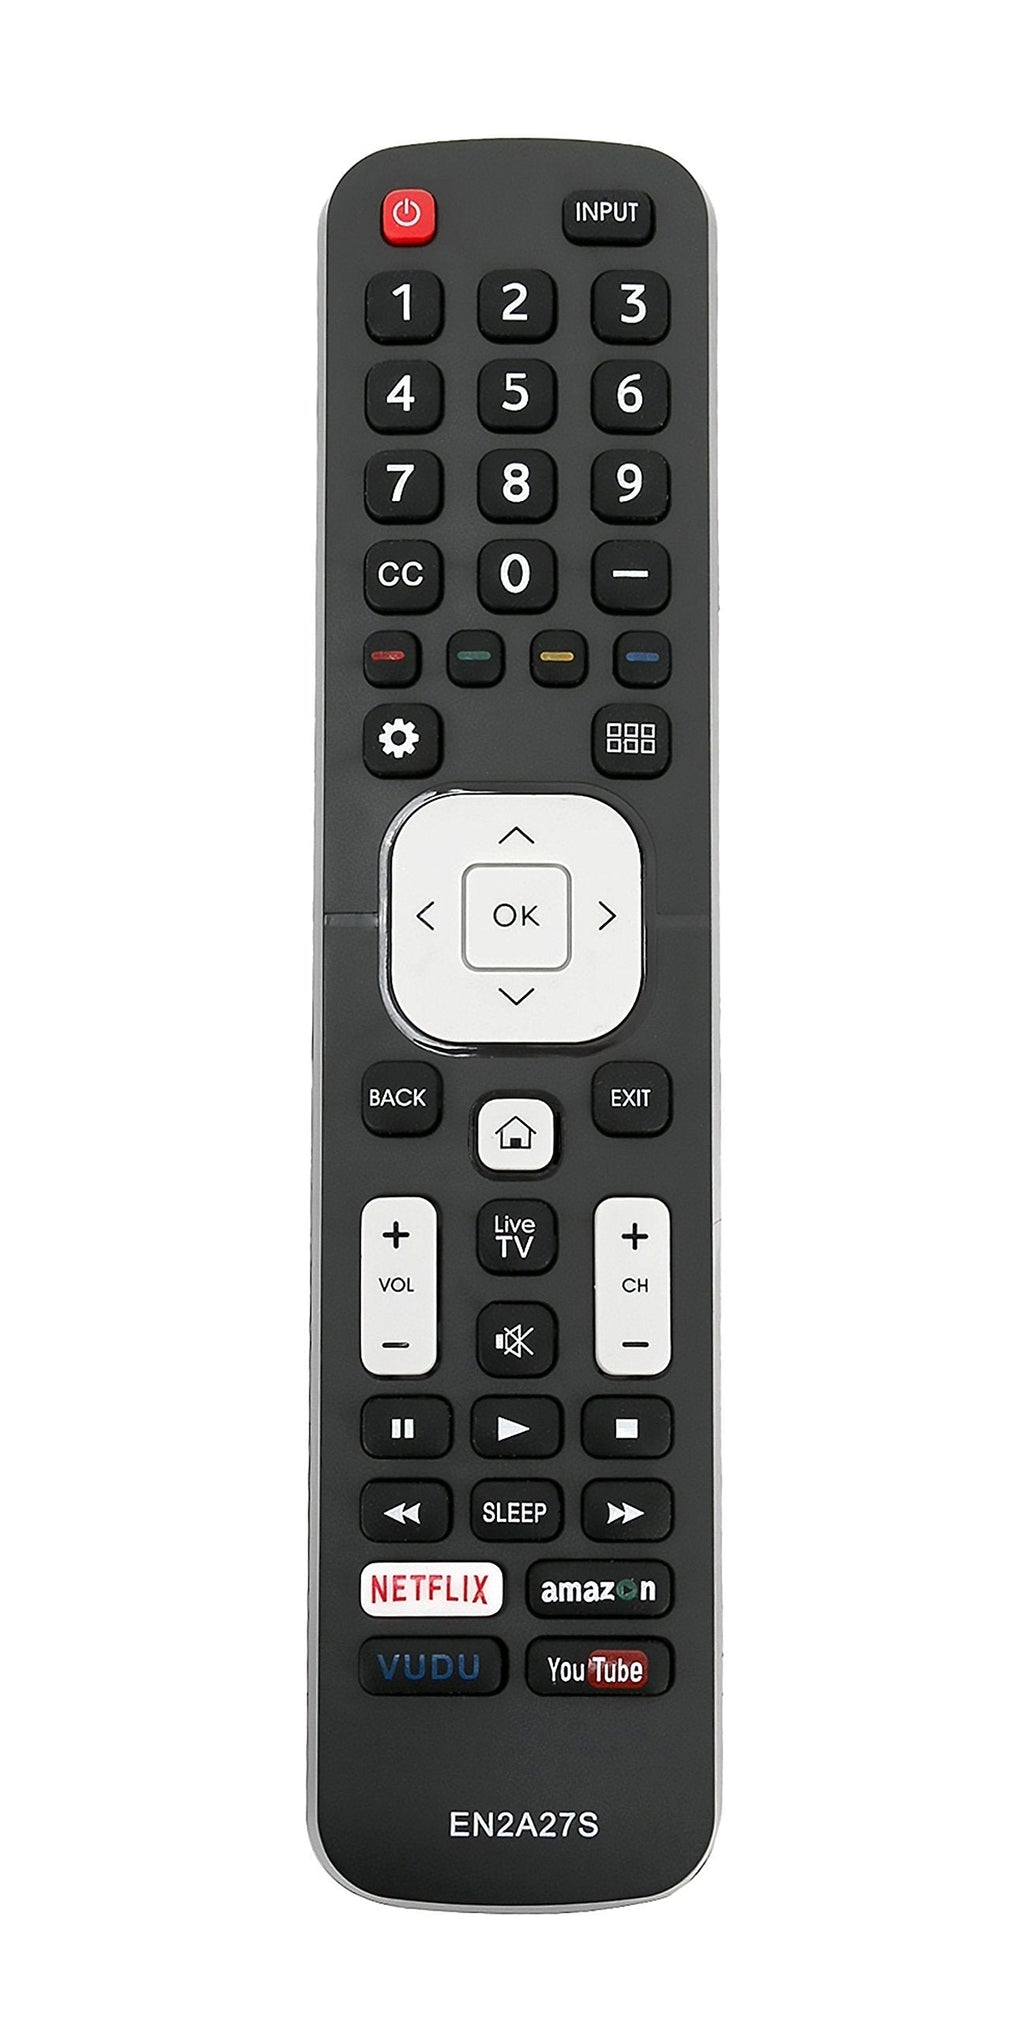 EN2A27S Replaced Remote fit for Sharp 4K Ultra LED Smart TV 55H6B 50H7GB 50H6B N6200U LC-40N5000U LC-43N5000U LC-43N6100U LC-43N7000U LC-50N5000U LC-50N6000U LC-50N7000U LC-55N620CU LC-55N5300 - LeoForward Australia